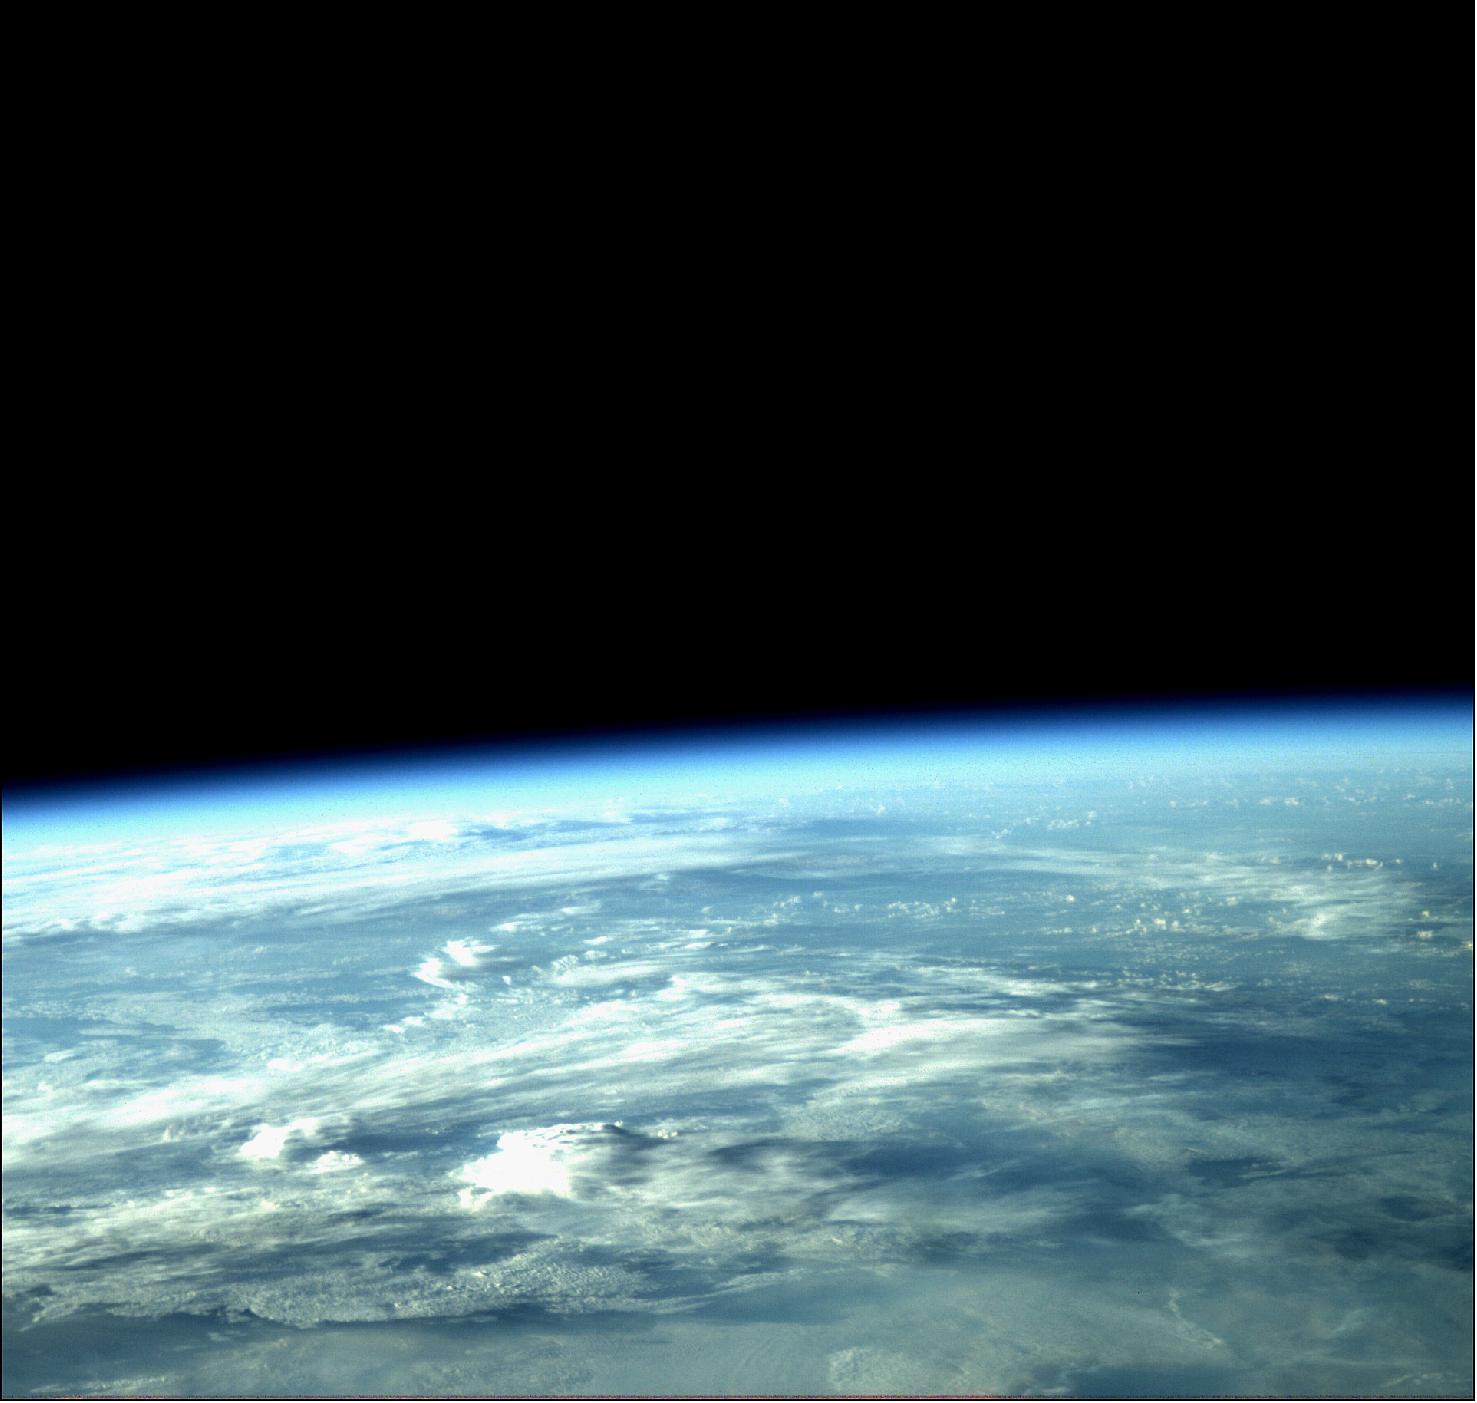 Figure 16: OPS-SAT captures the vast blackness of space, alongside the colourful complexity of Earth, with a fragile, ghostly atmosphere protecting one realm from the other. This photo was taken on 16 August 2020 at 6:24 UTC. At this time, OPS-SAT was undergoing ‘payload commissioning’ - when instruments are turned on, tested and calibrated. At the same time, it still managed to capture this beautiful image with its high-definition camera, at an altitude of over 500 km (image credit: ESA)